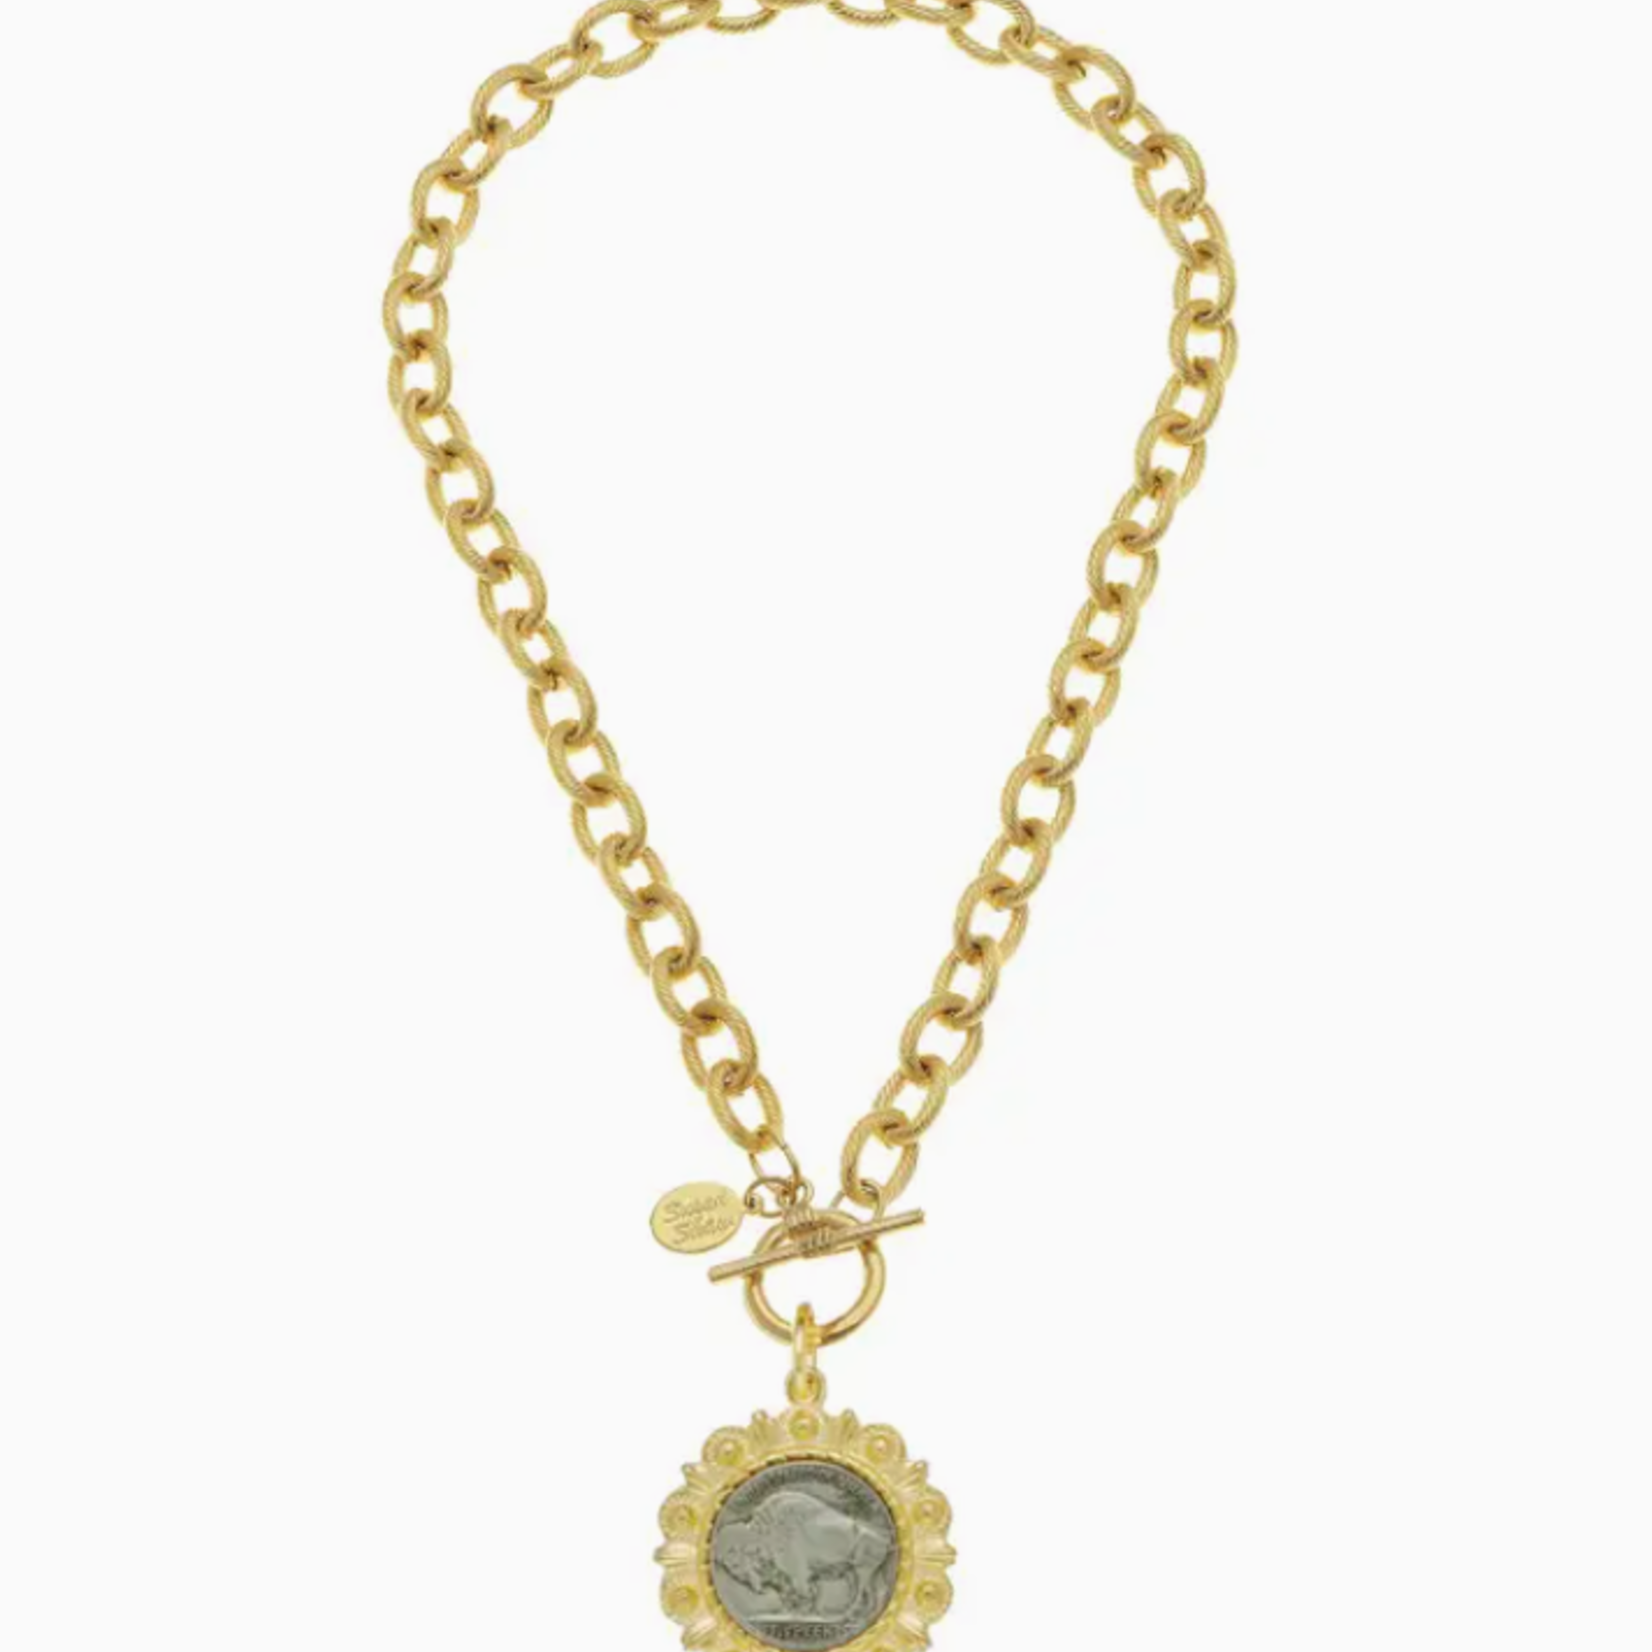 susan shaw Genuine Buffalo Nickel on 24kt Gold Plated Necklace